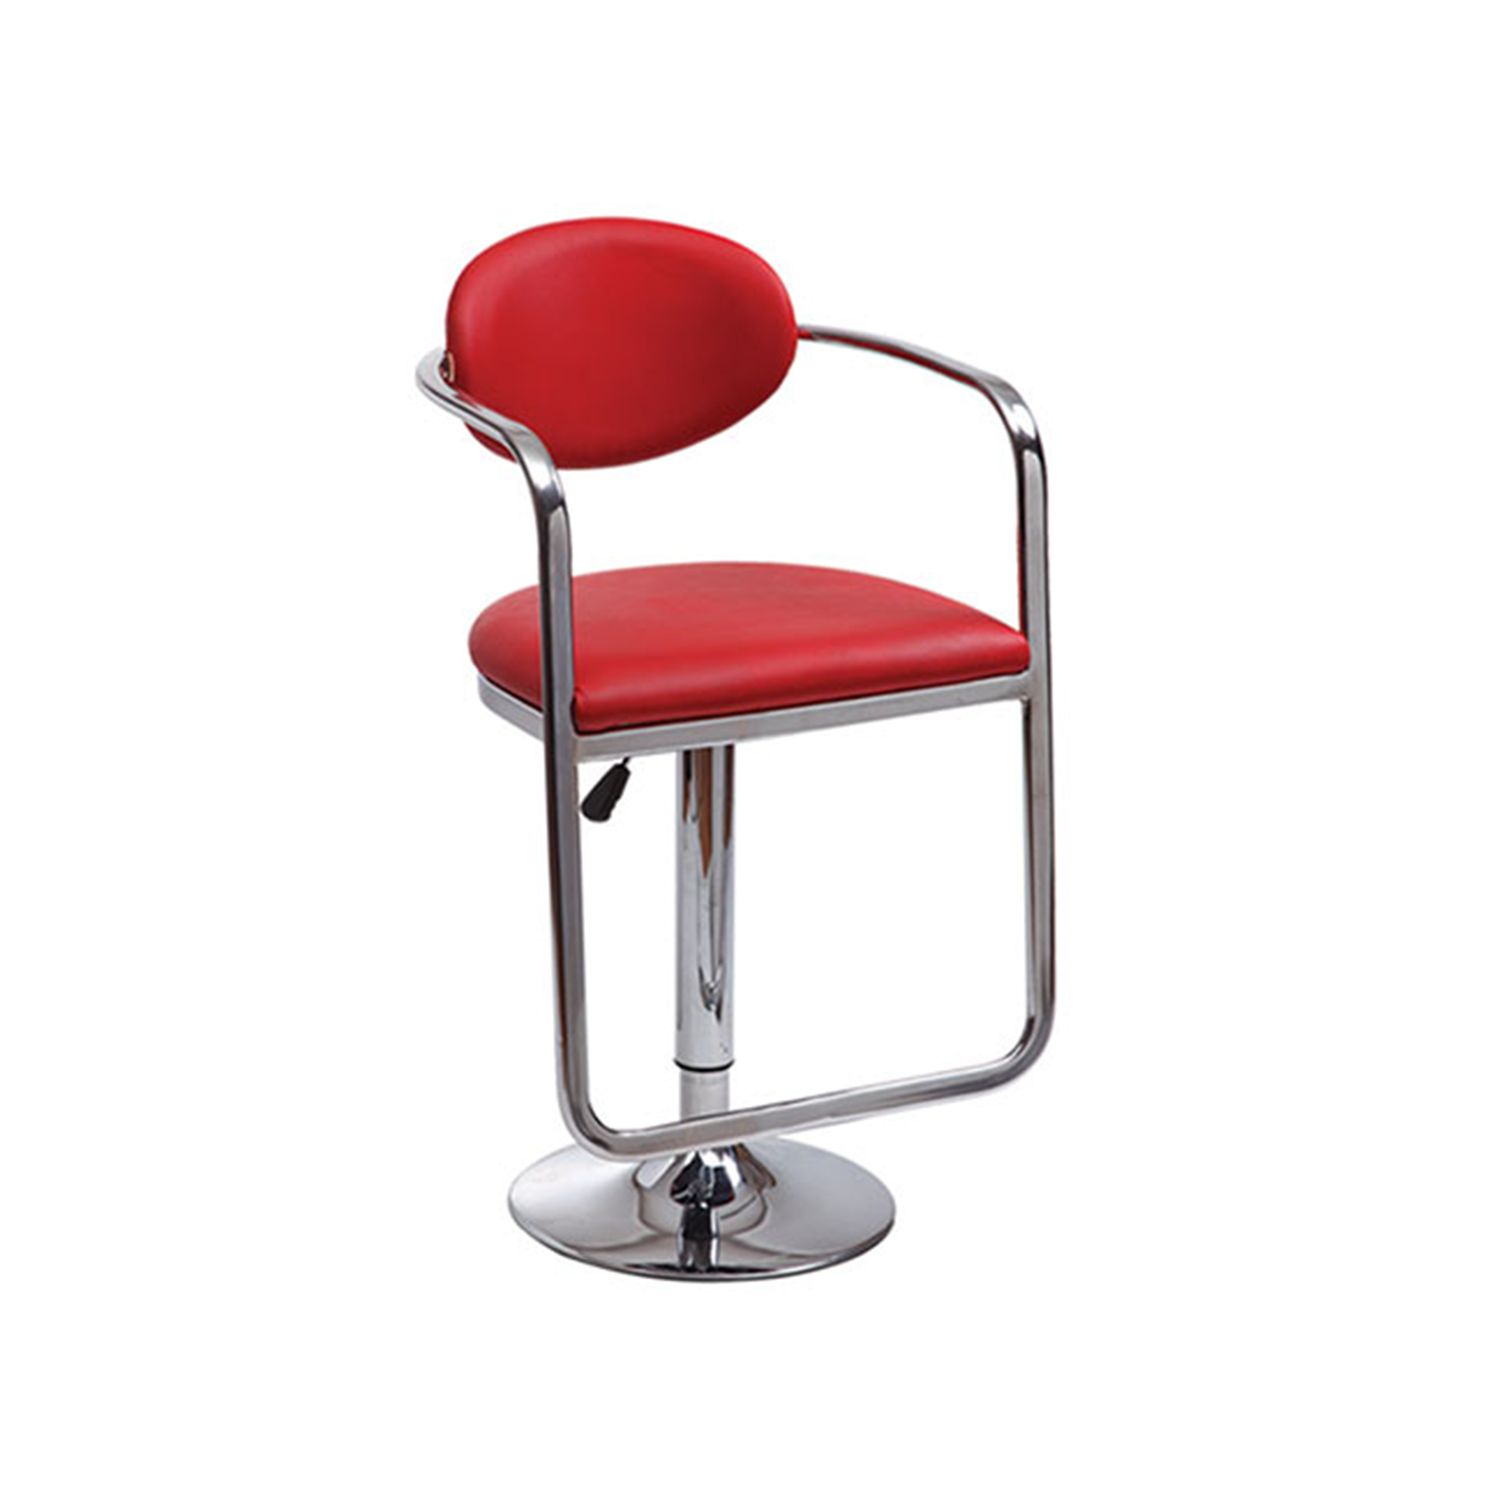 Revolving Chair With Chrome Plated Metal Arm